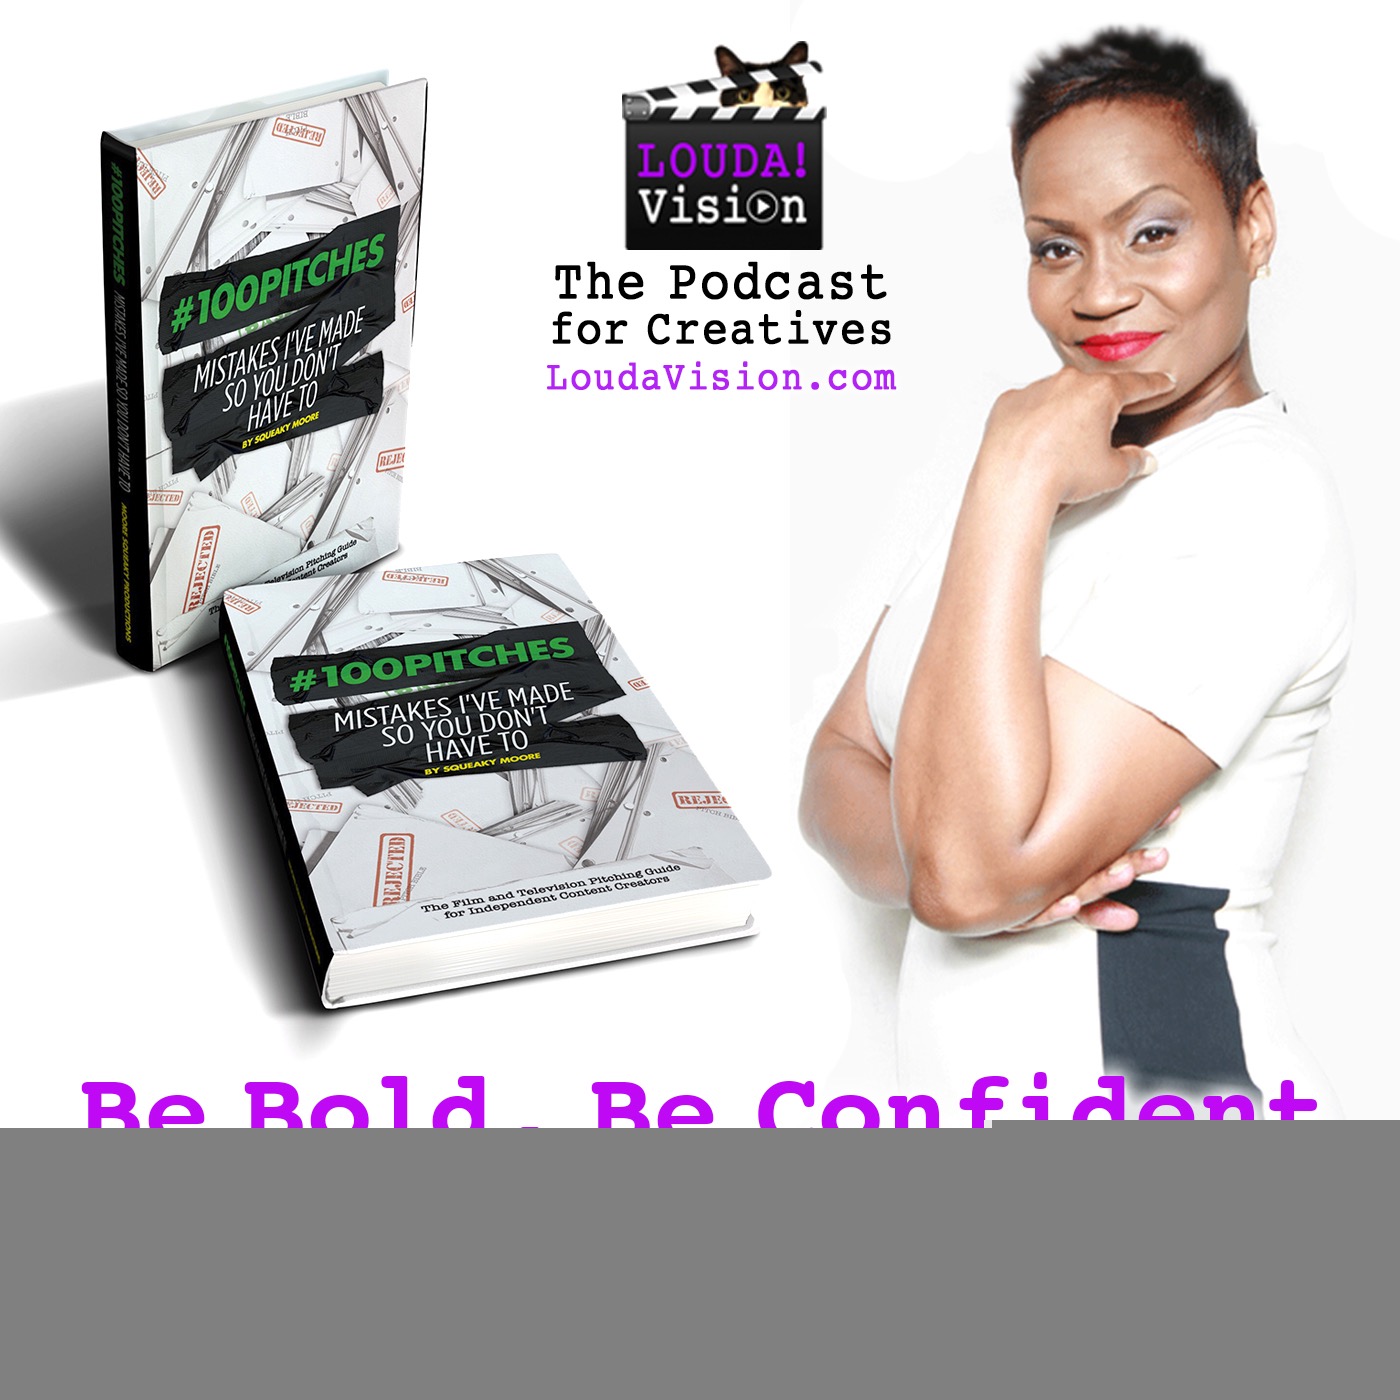 Be Bold. Be Confident. Pitch Your Heart Out – with Squeaky Moore